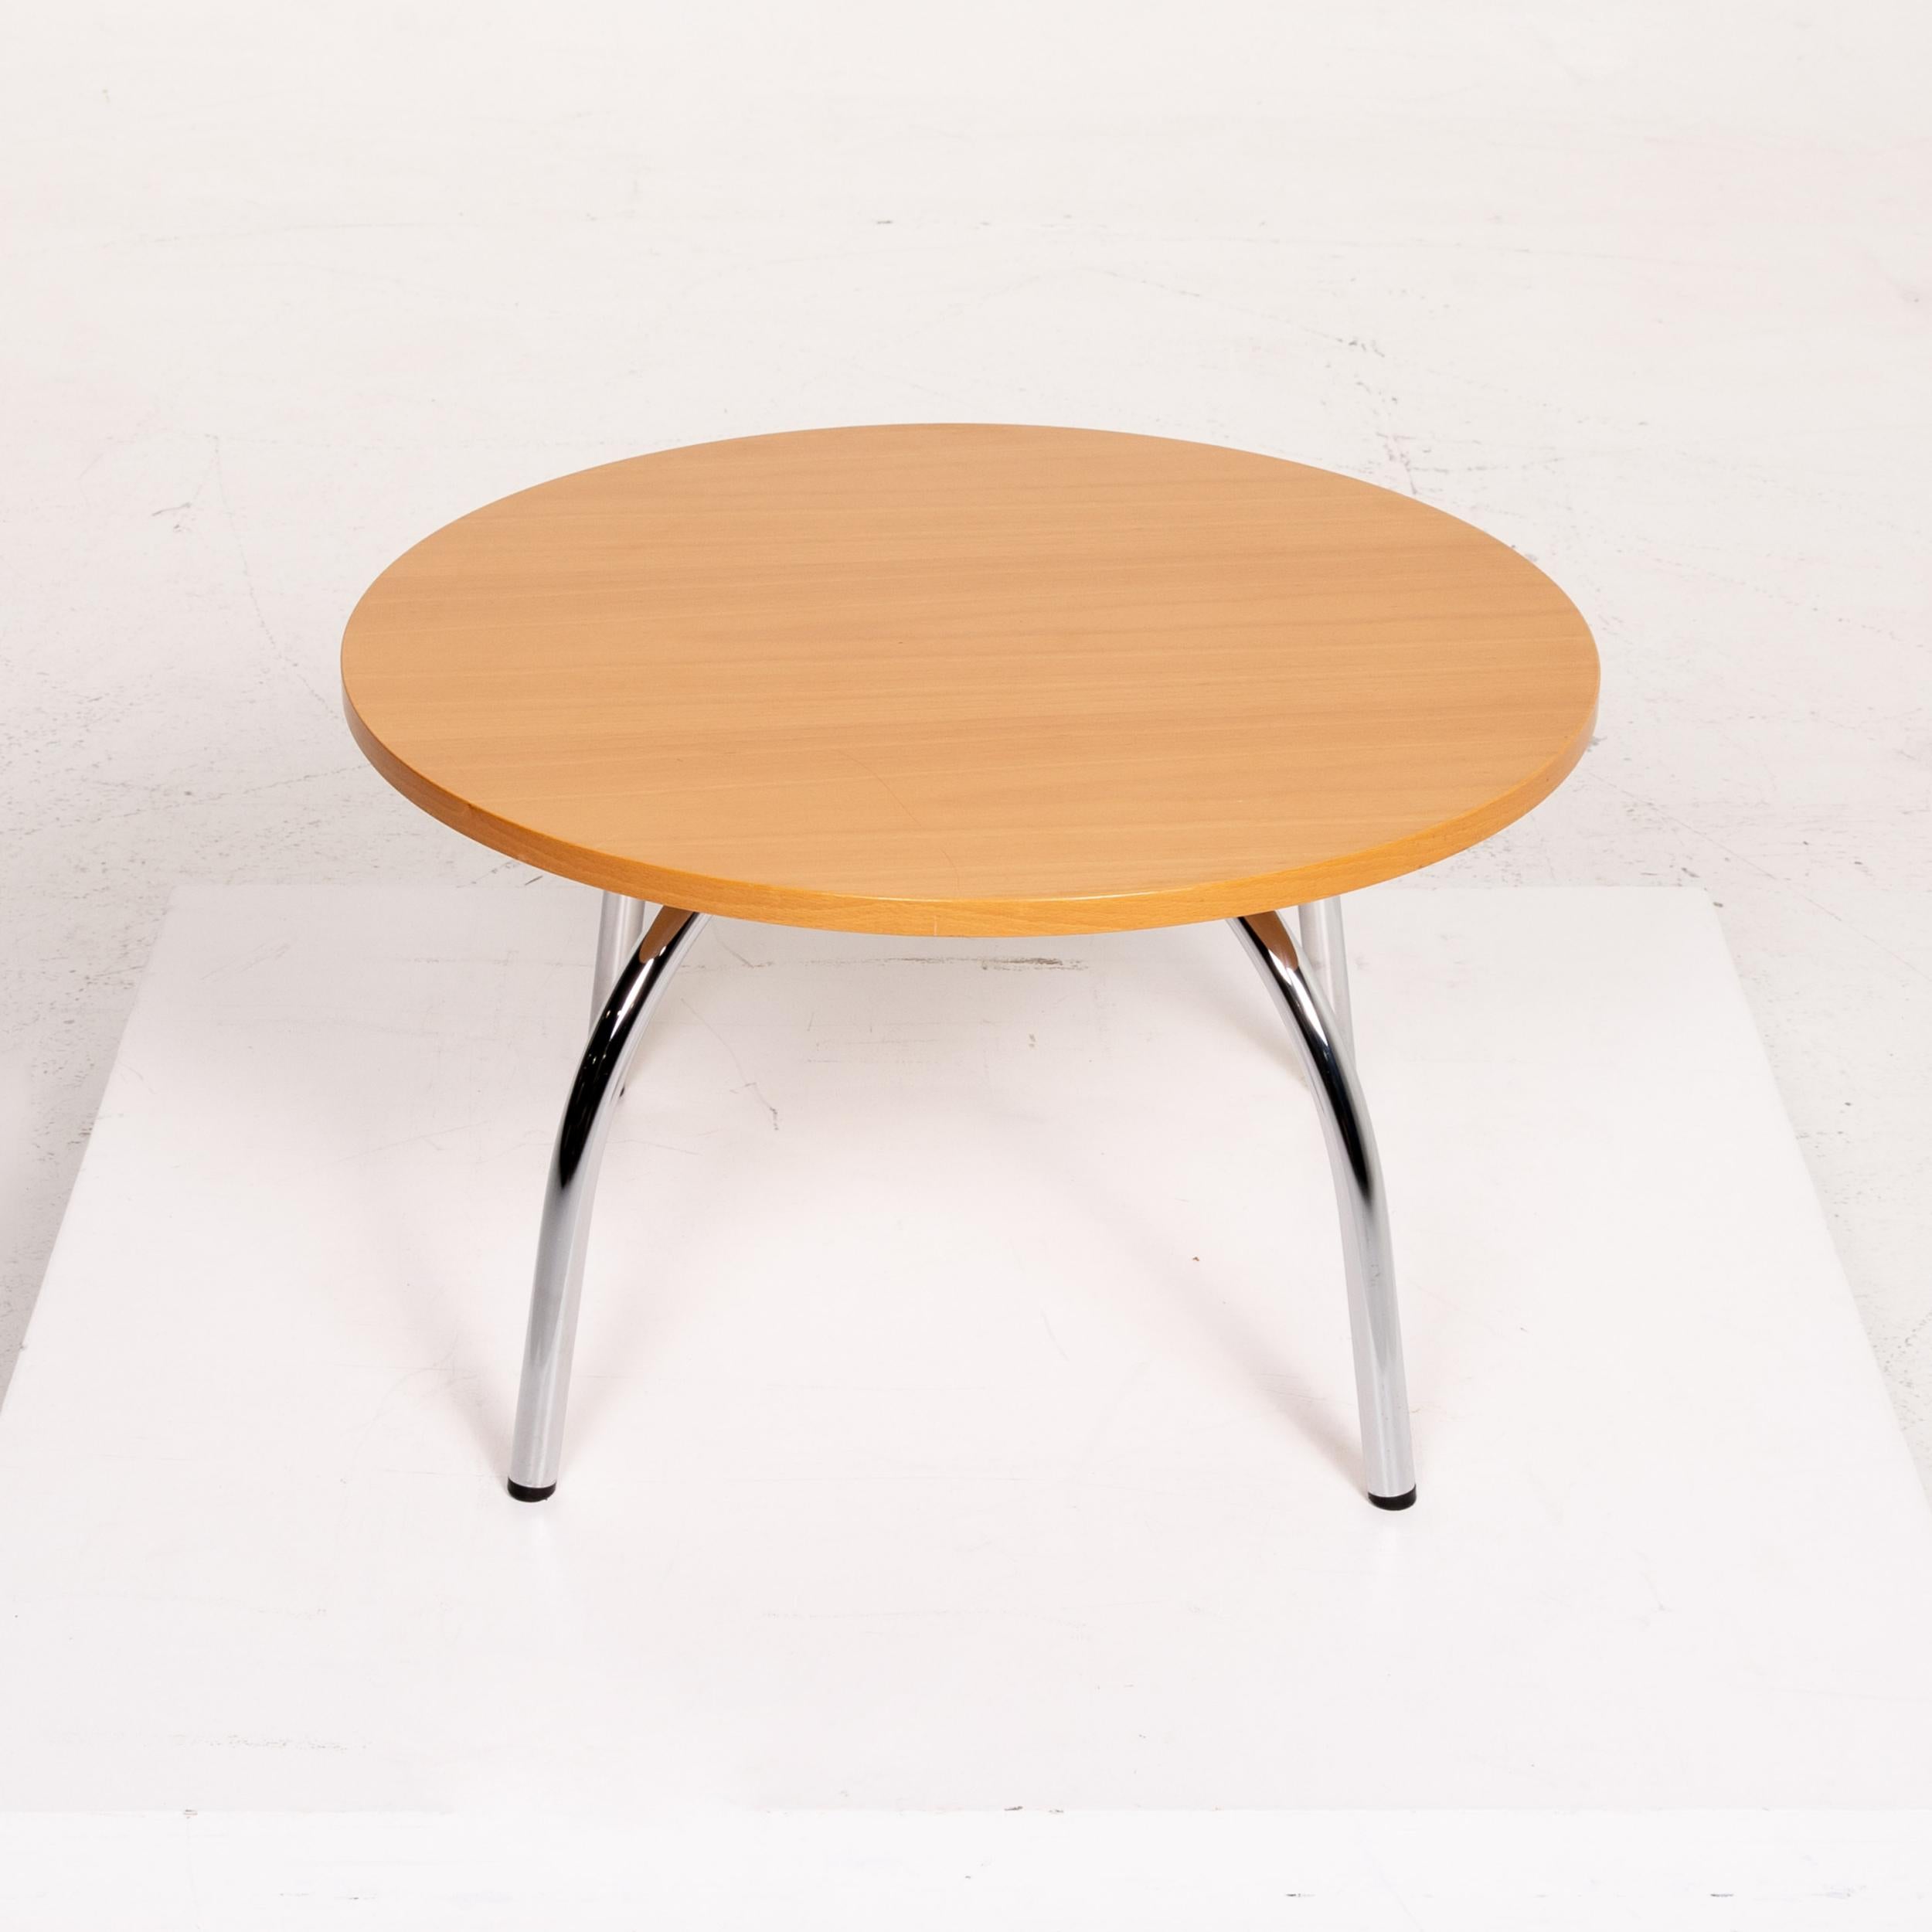 Walter Knoll Wooden Coffee Table Round Table In Good Condition For Sale In Cologne, DE